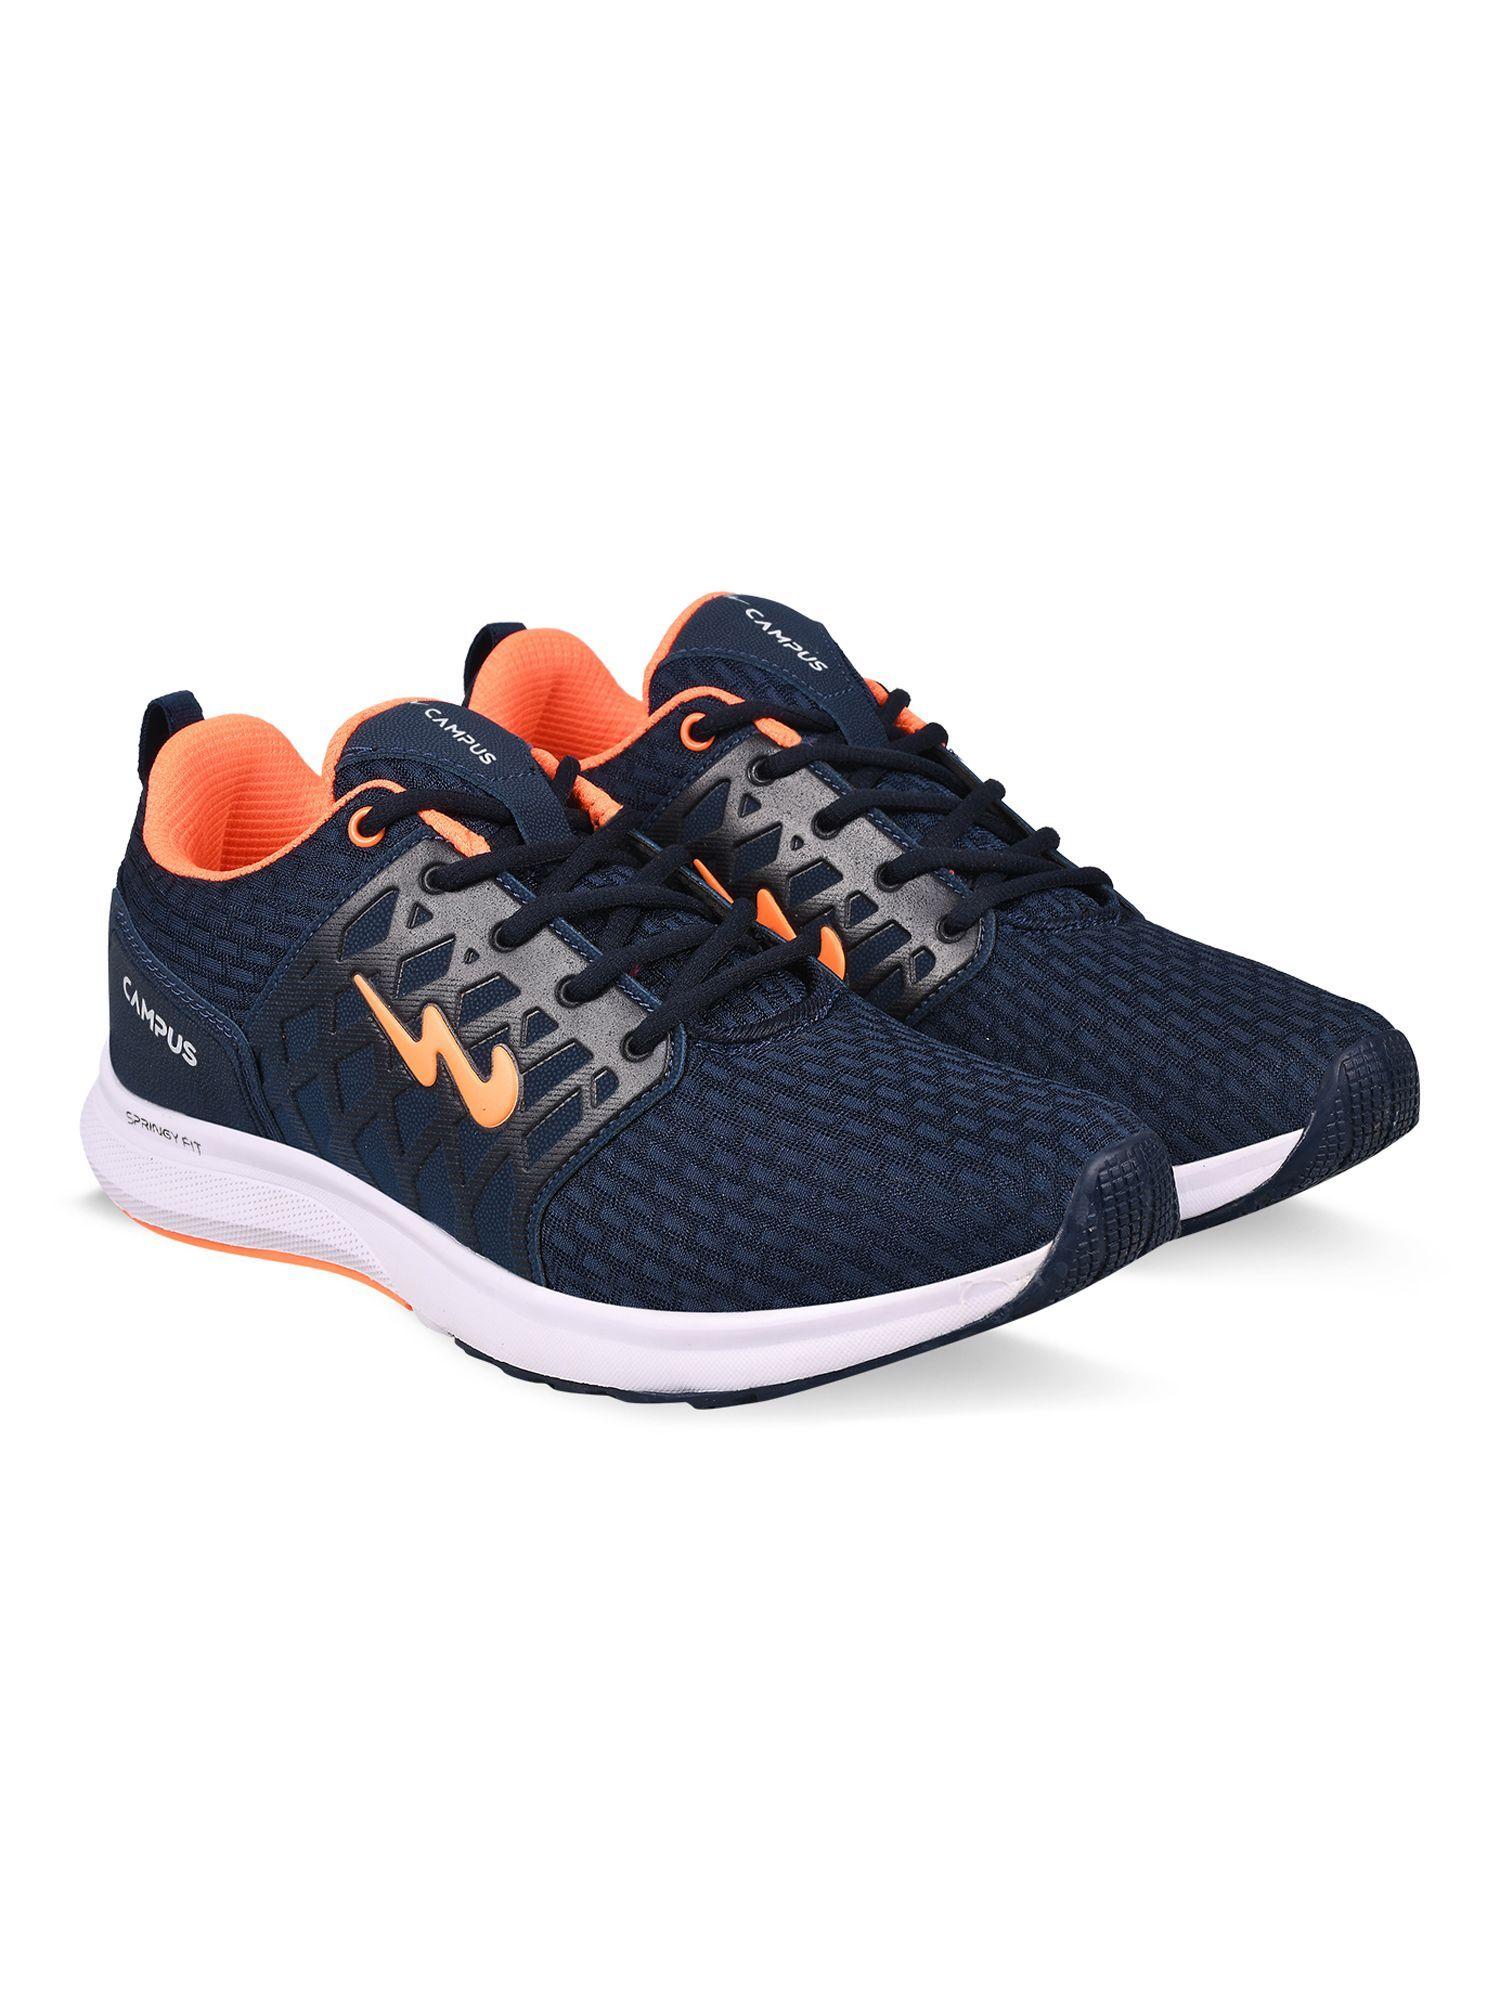 rodeo-pro-blue-mens-running-shoes